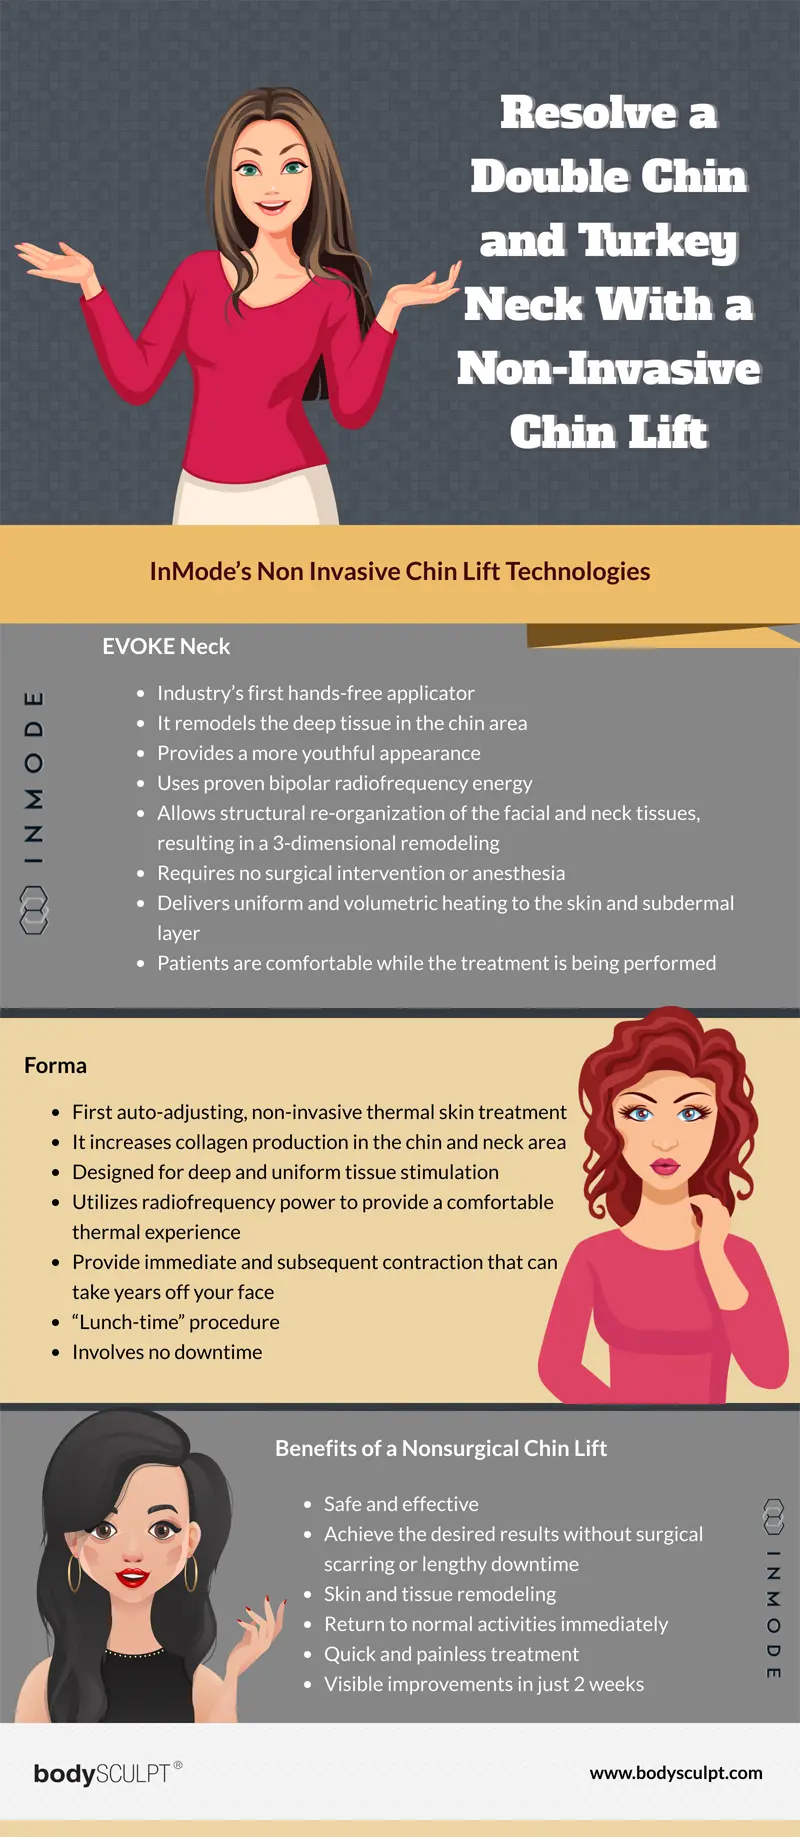 Resolve a Double Chin and Turkey Neck With a Non-Invasive Chin Lift [INFOGRAPHIC]